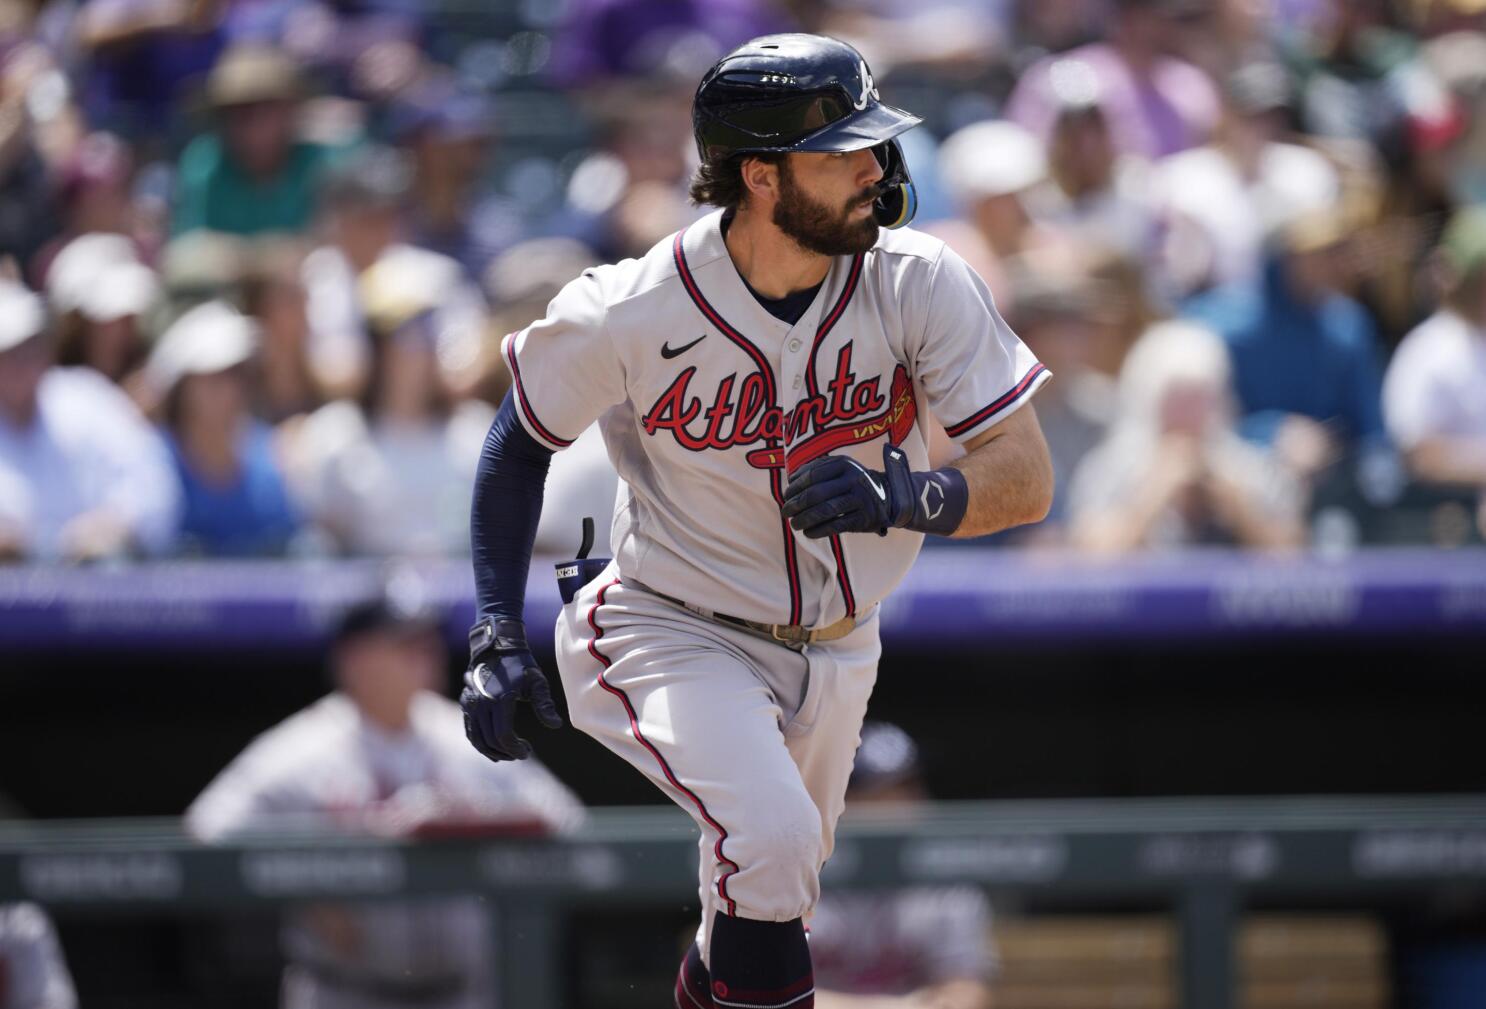 Swanson becomes 4th Braves player at arbitration hearing